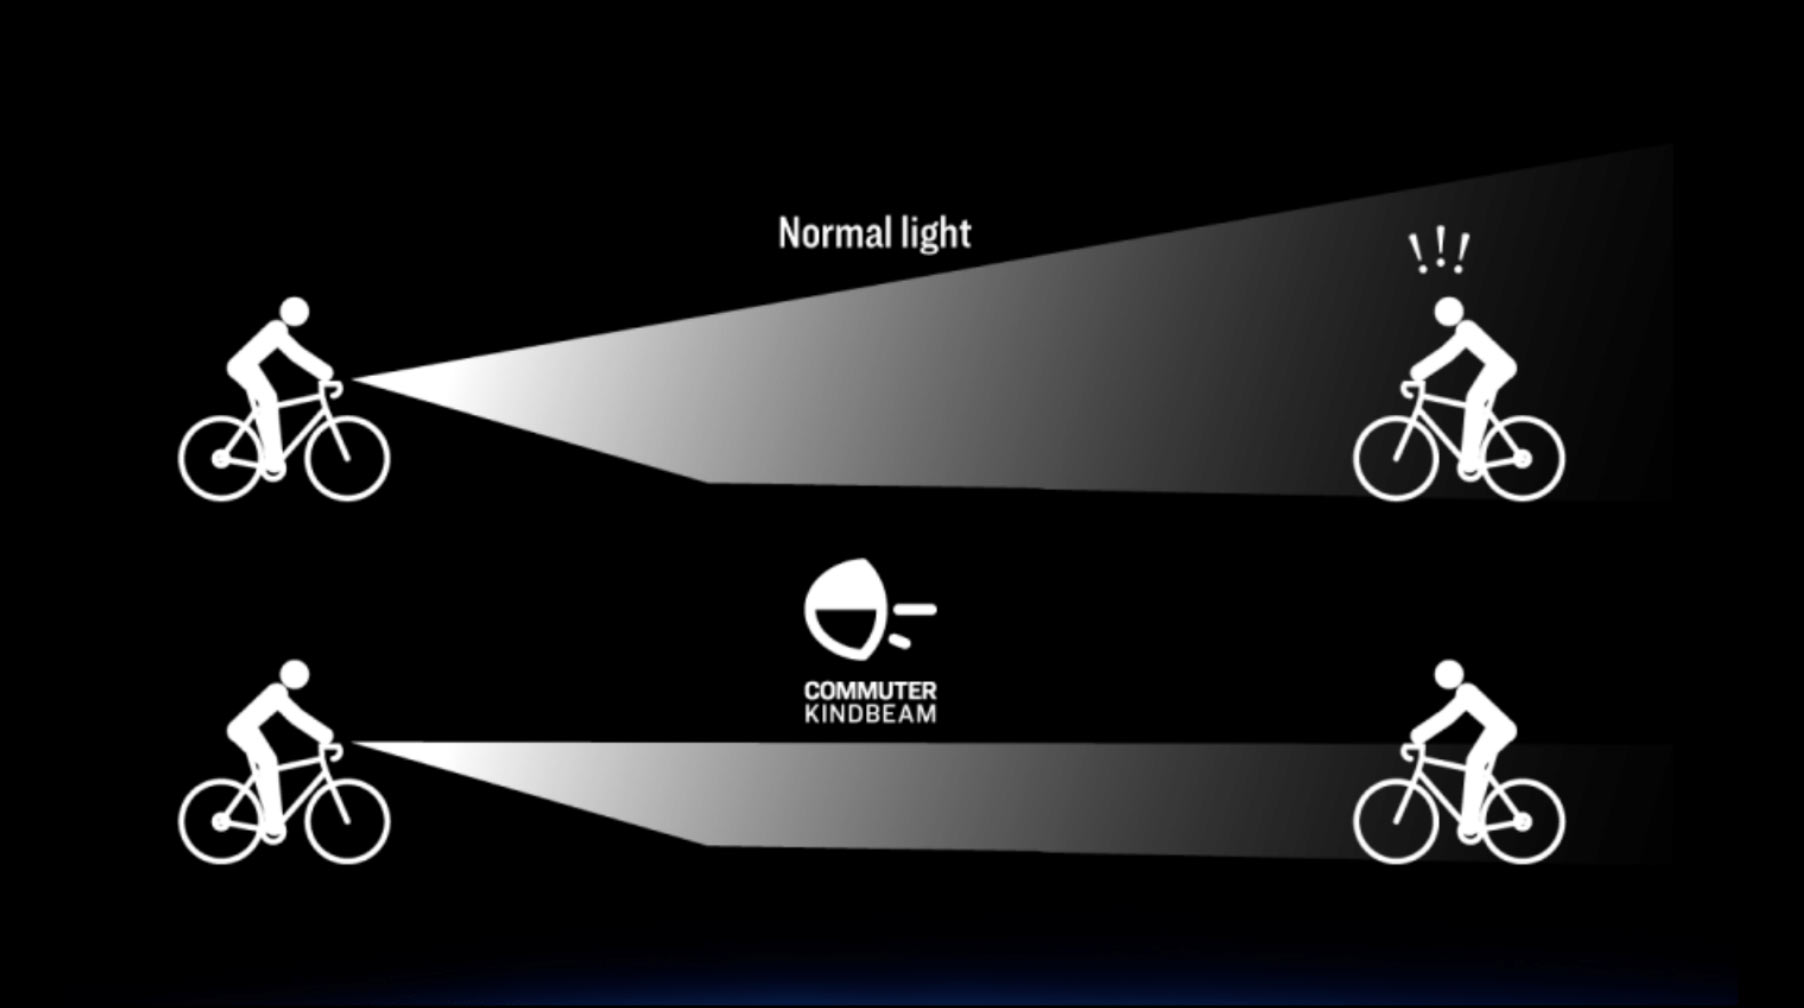 Trek Commuter Pro Light shines bright without blinding oncoming